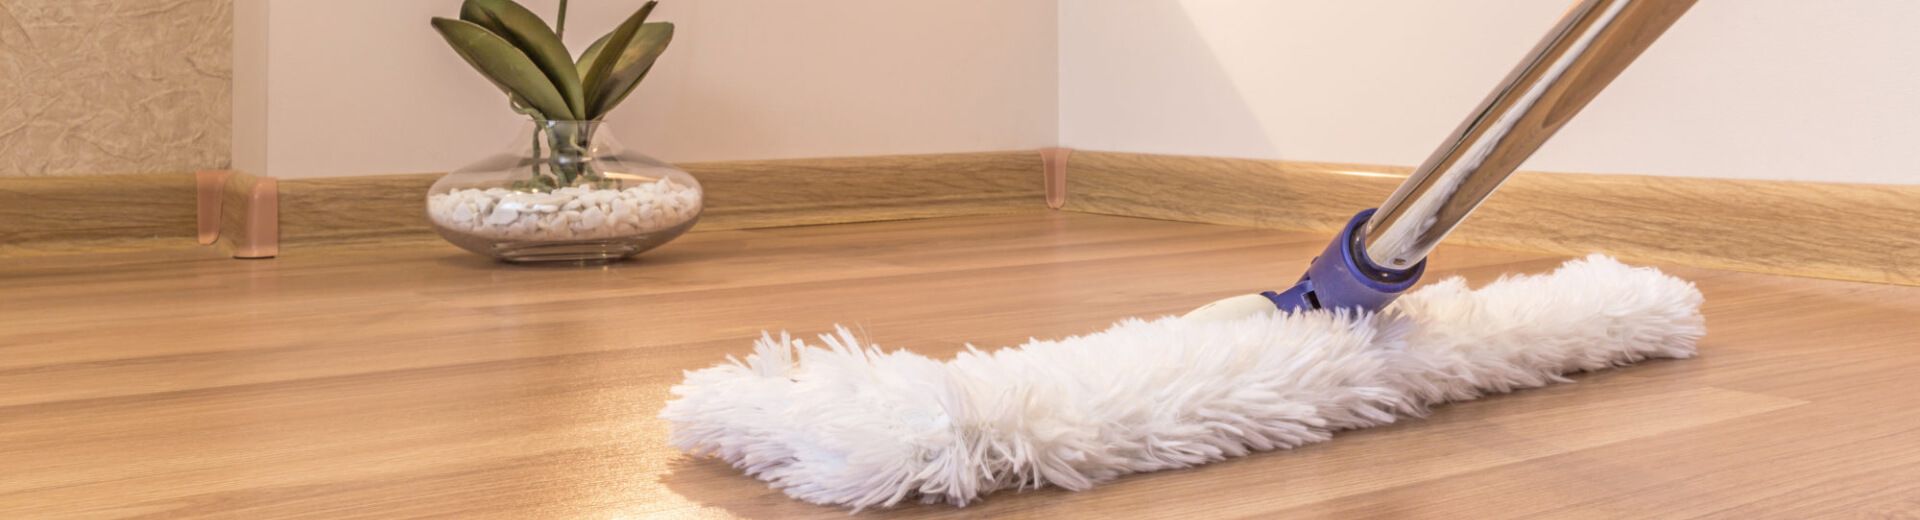 How To Clean Hardwood Floors The Right Way, How Do You Care For Hardwood Floors